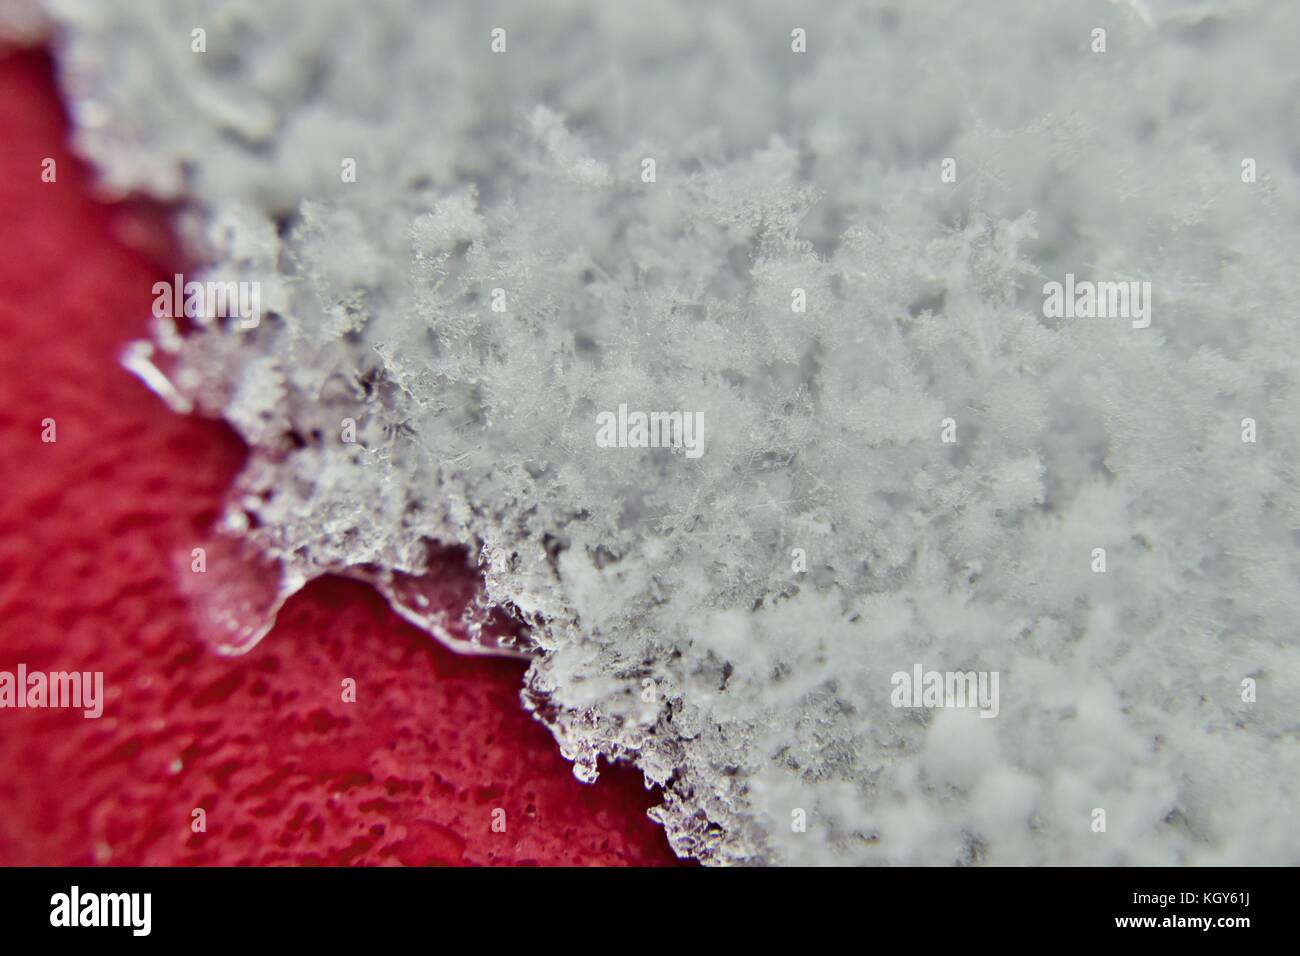 Close up of snowflakes on red surface during early snowfall Stock Photo